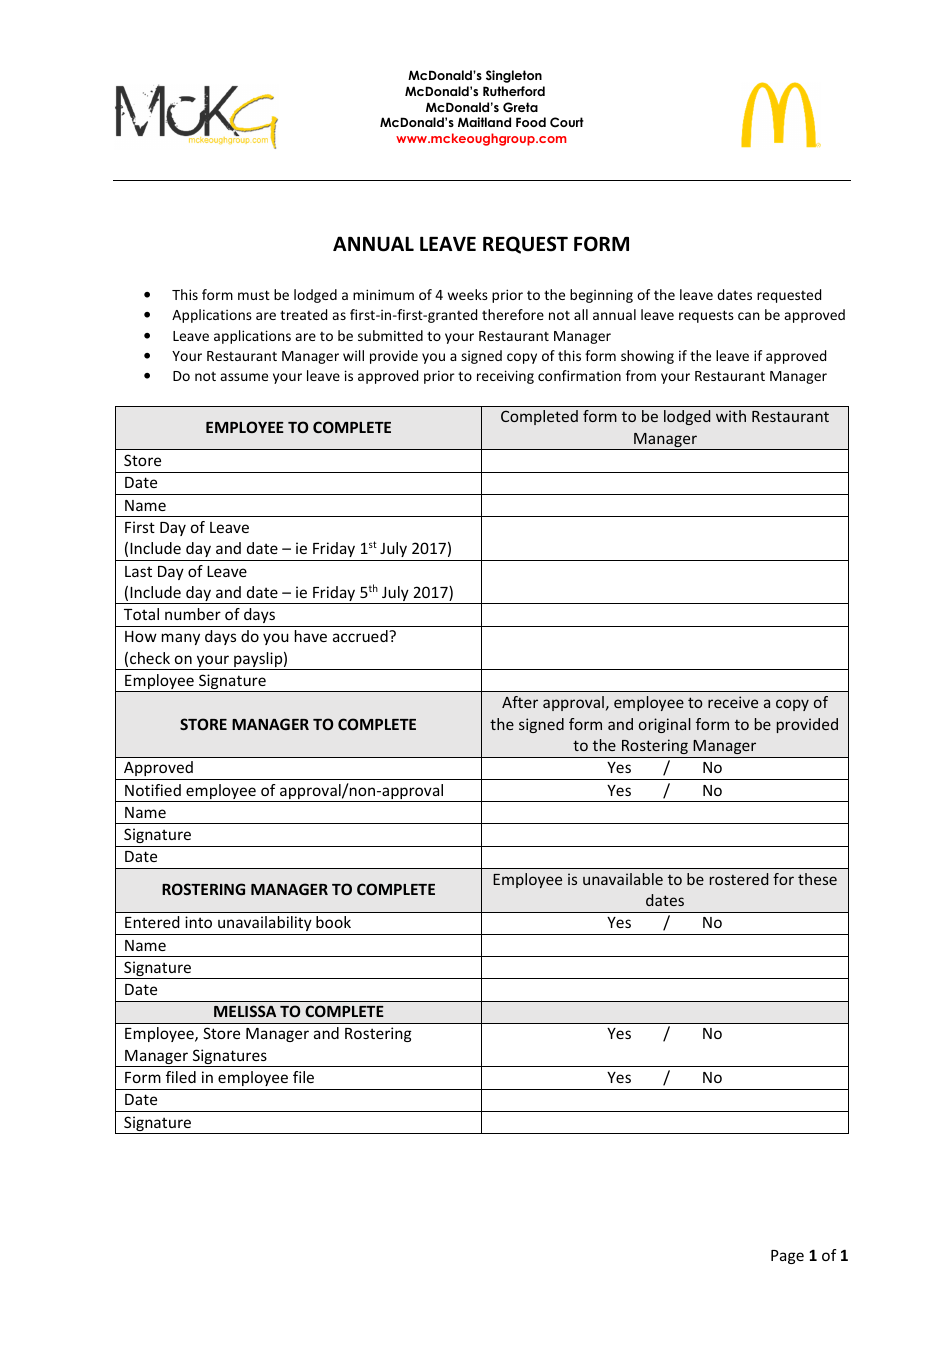 Annual Leave Request Form - Mcdonalds, Page 1